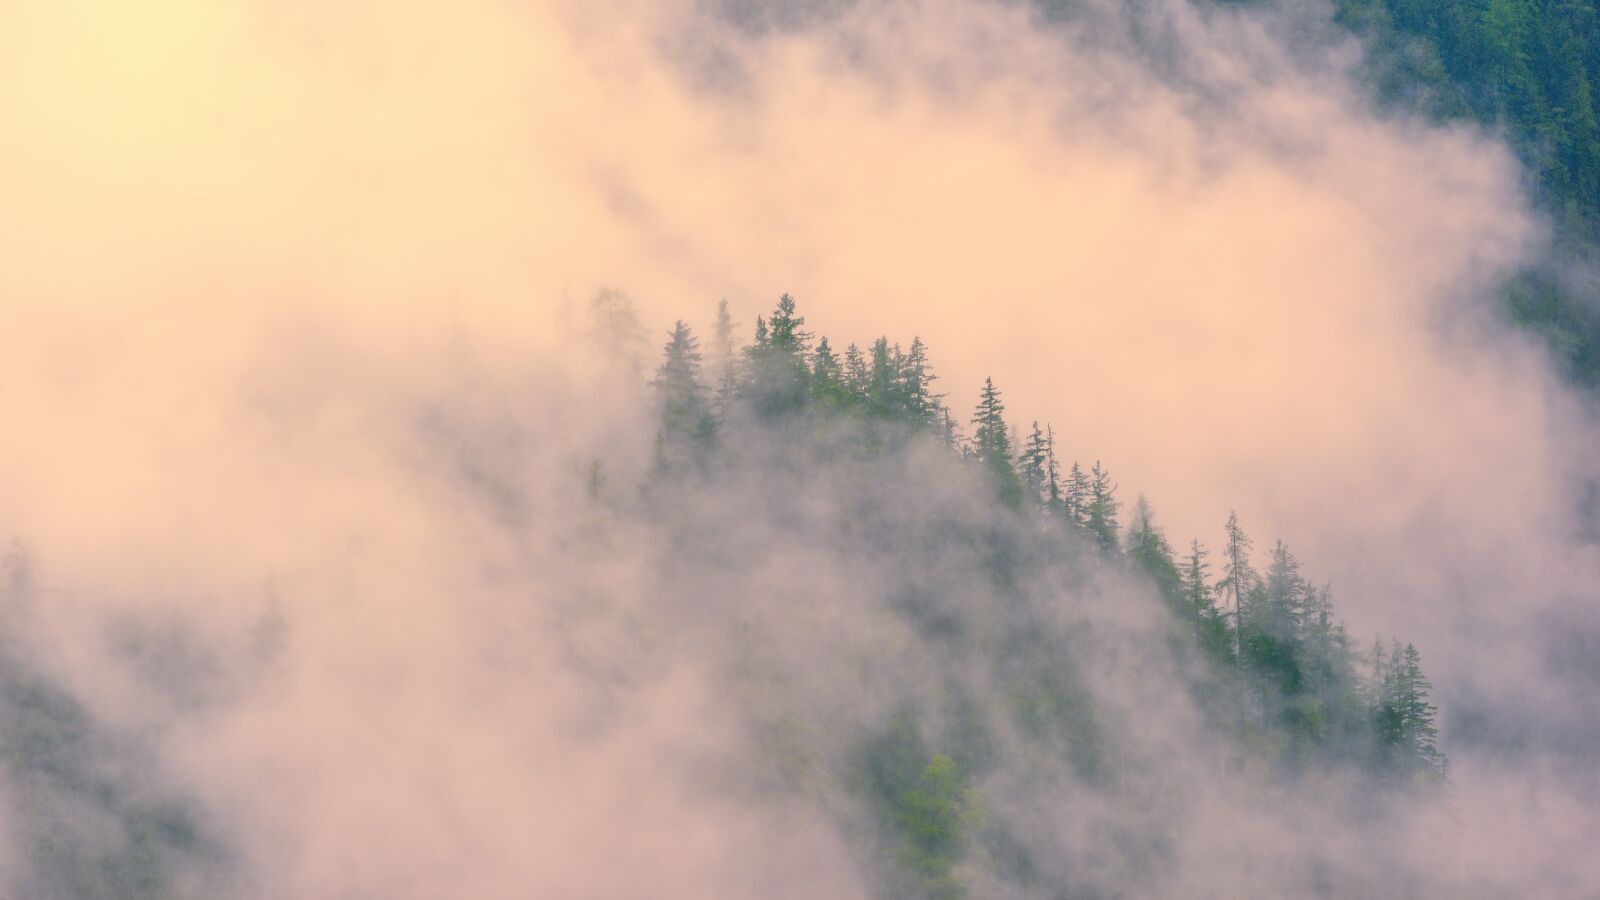 Sony a7 + Sony DT 50mm F1.8 SAM sample photo. Fog, coniferous forest, morning photography